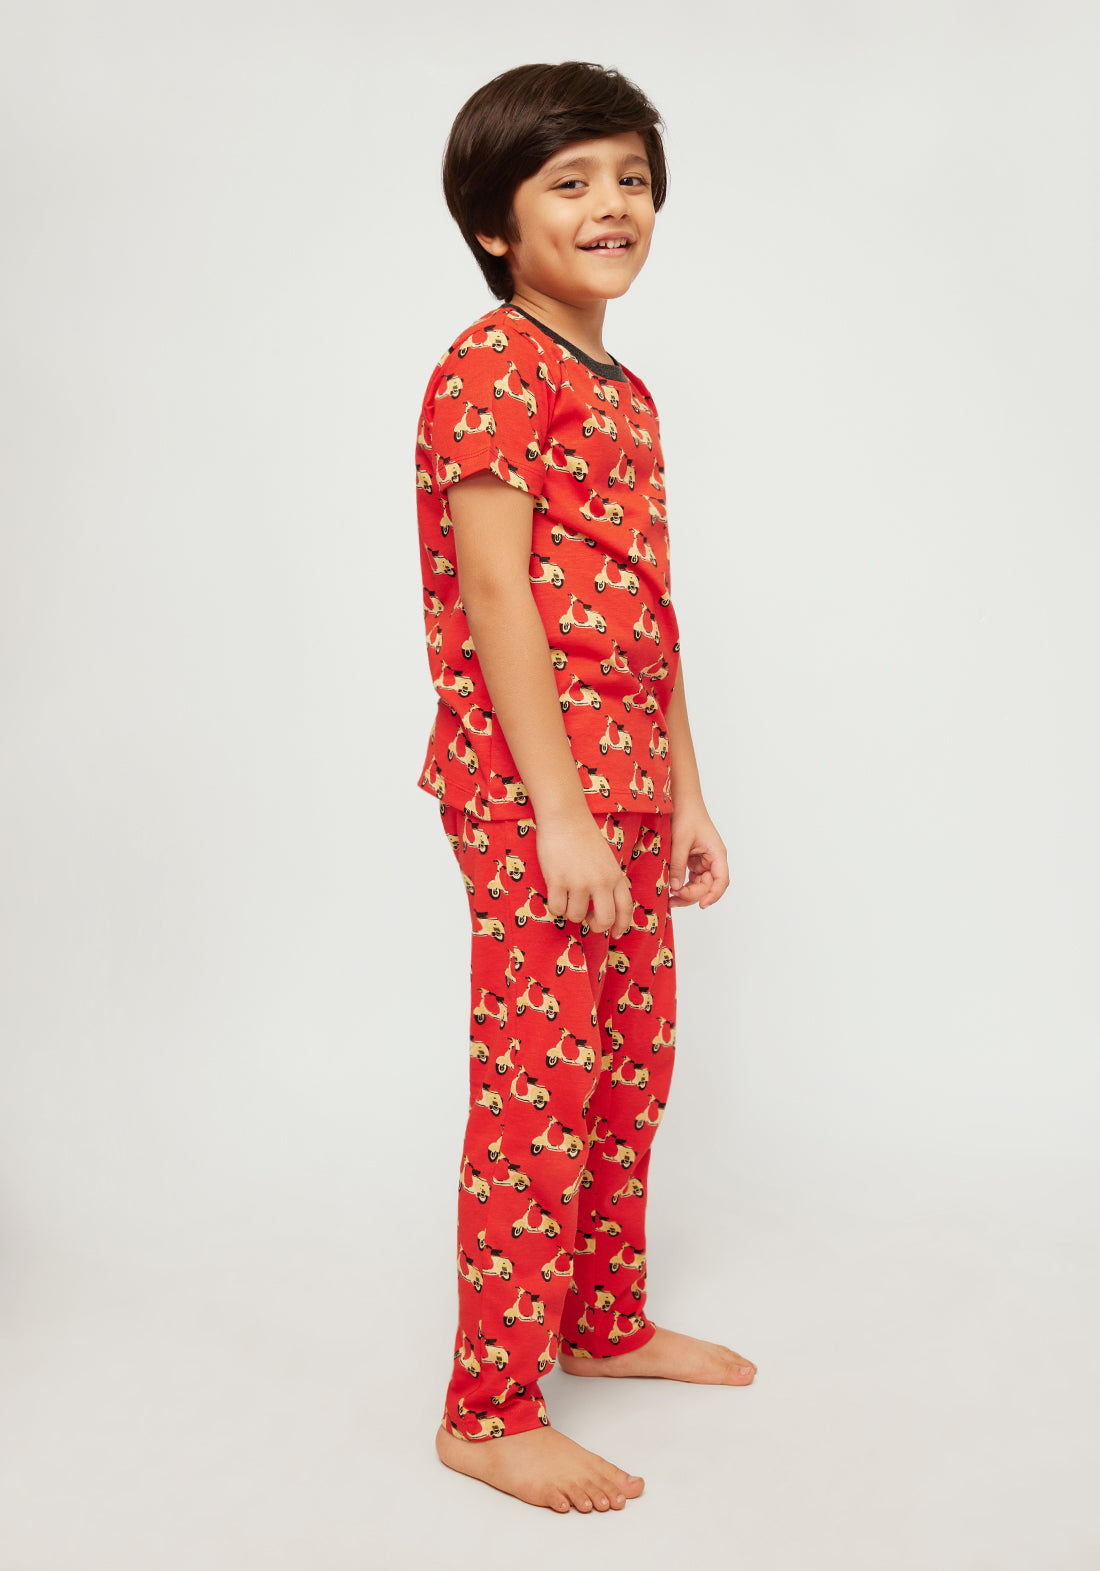 RED, YELLOW AND BLACK SCOOTER PRINT SHORT SLEEVE PAJAMA SET